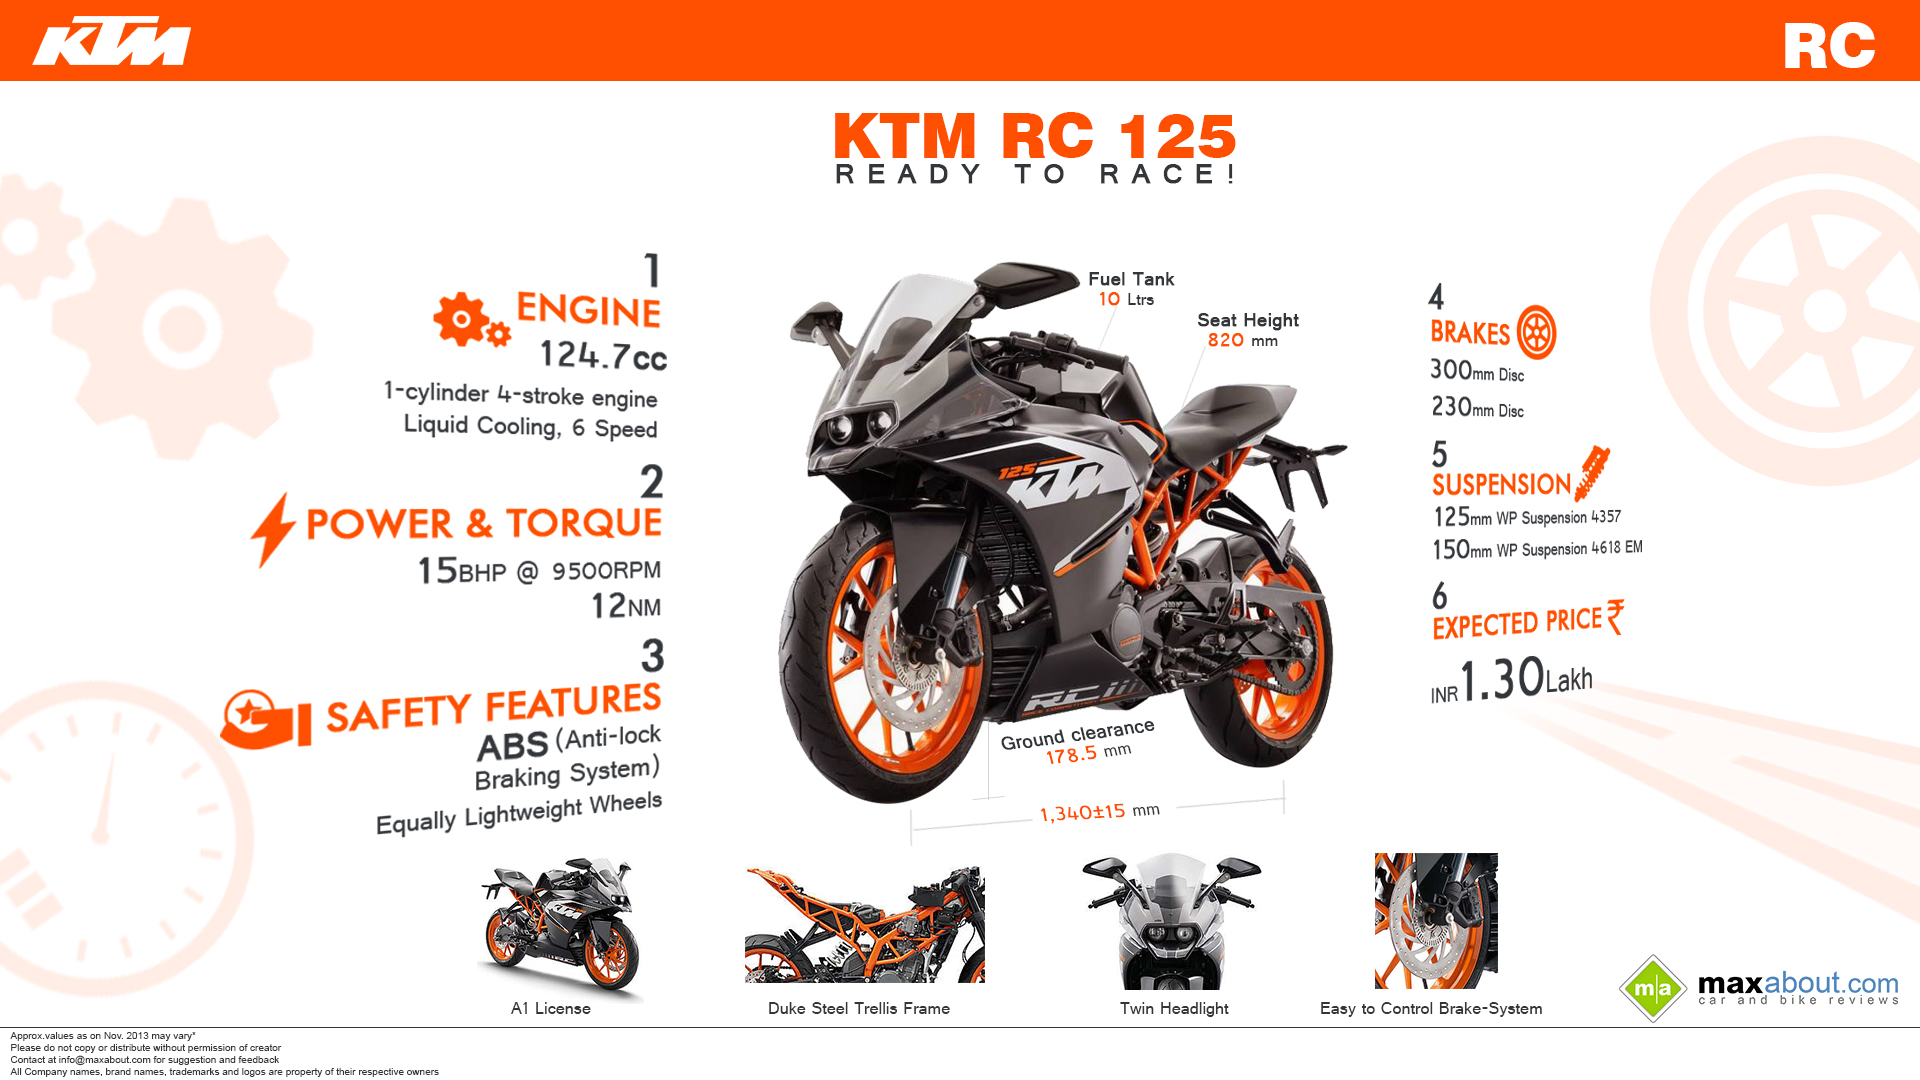 KTM RC 125 Wallpaper: 6 Things You Need to Know